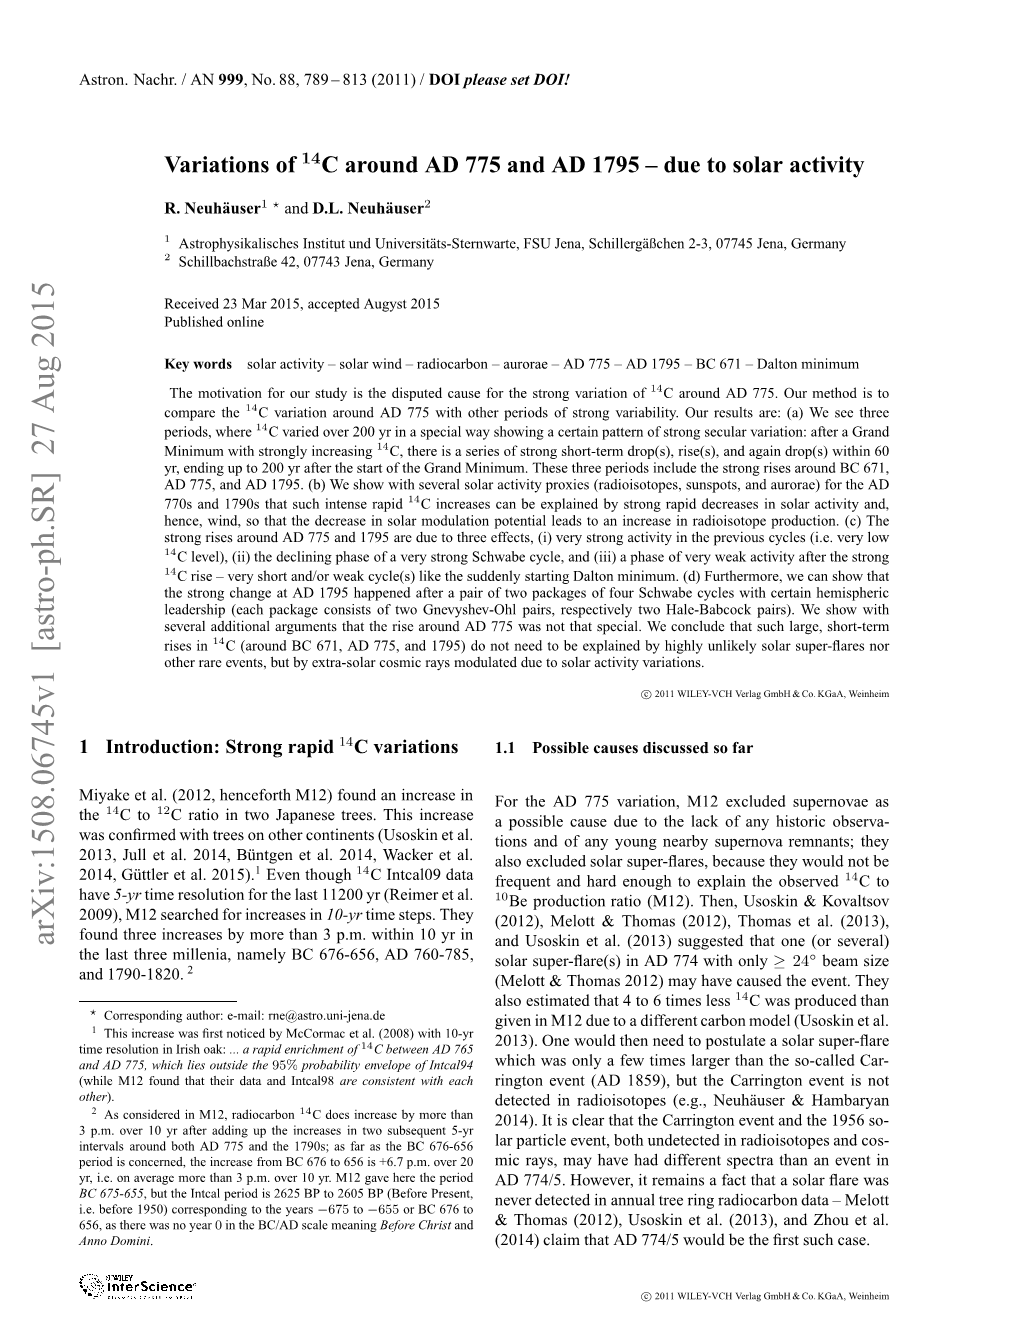 Variations of 14-C Around AD 775 and AD 1795-Due to Solar Activity